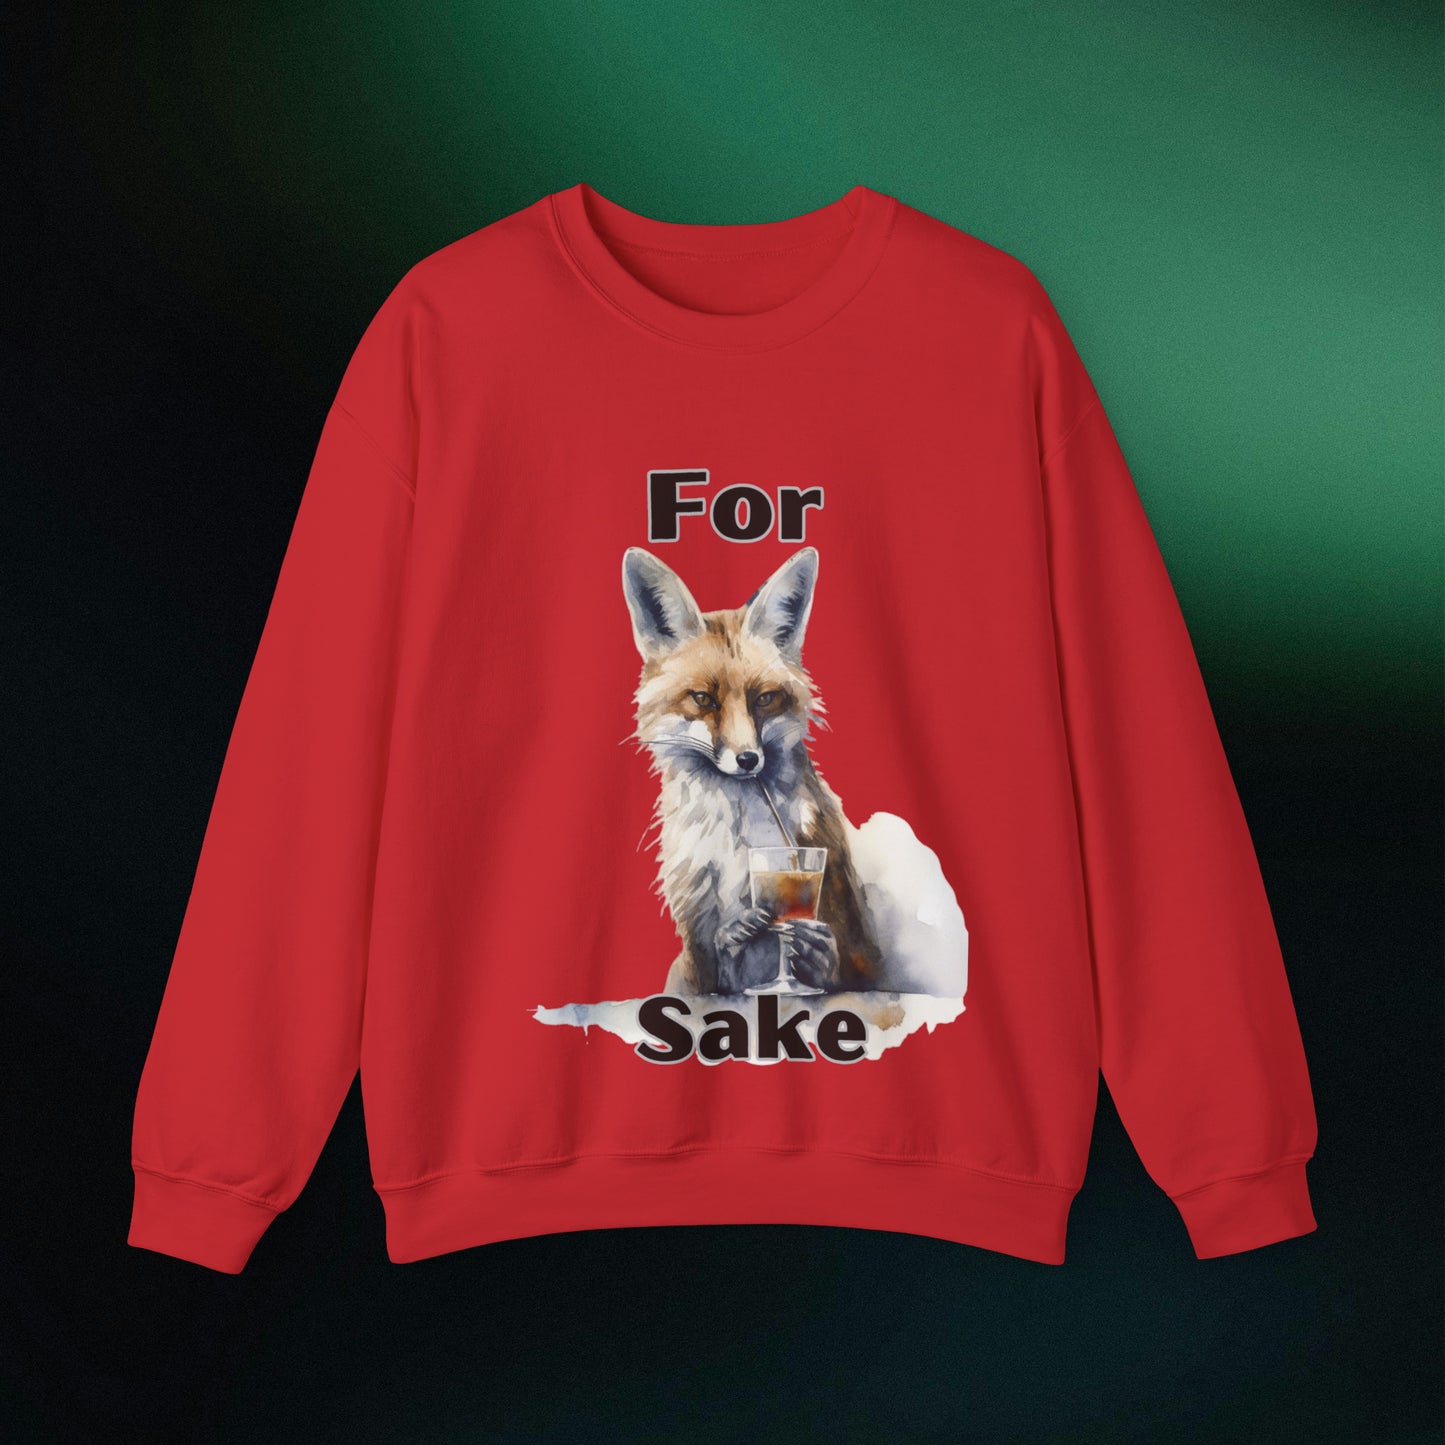 For Fox Sake: Funny Fox Sweatshirt | Gift for Fox Lover | Animal Lover Shirt - Cute Fox Gift for Nature Enthusiasts Sweatshirt S Red 